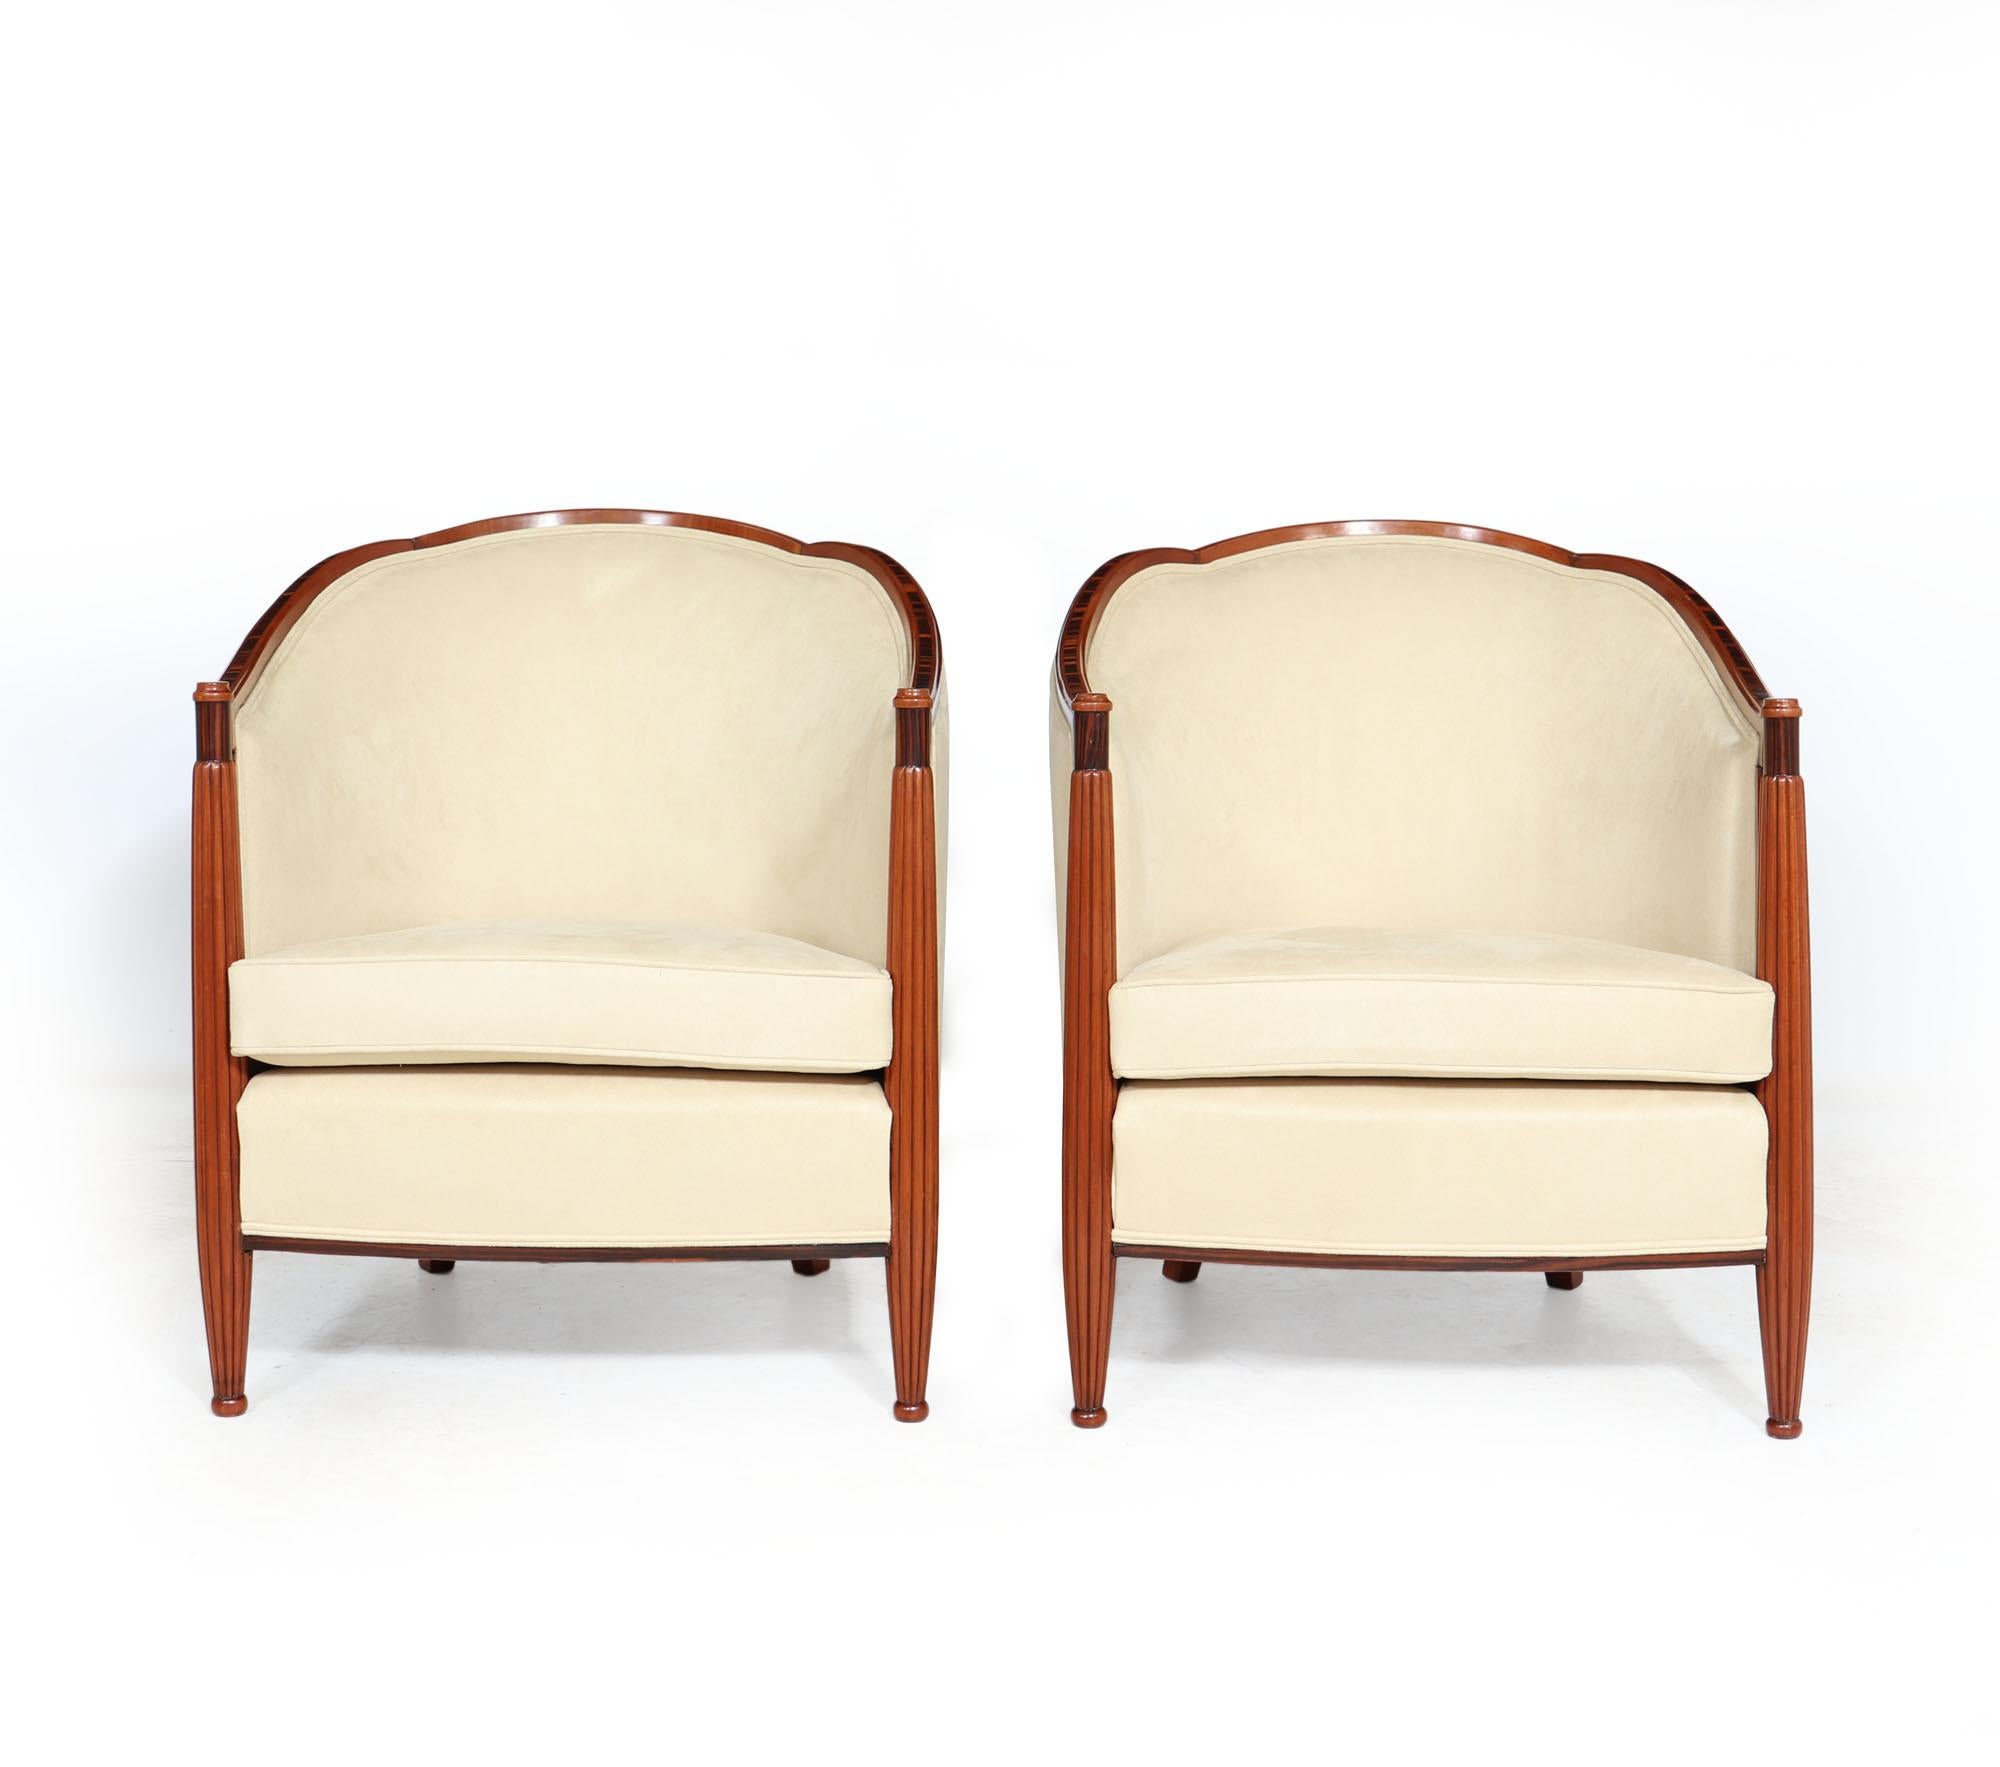 A pair of French Art Deco armchairs with reeded front legs tri lobe-shaped top and macassar ebony detail at the top of the front leg and around the base of the chair. These chairs have been stripped down to the frame and fully polished then fully